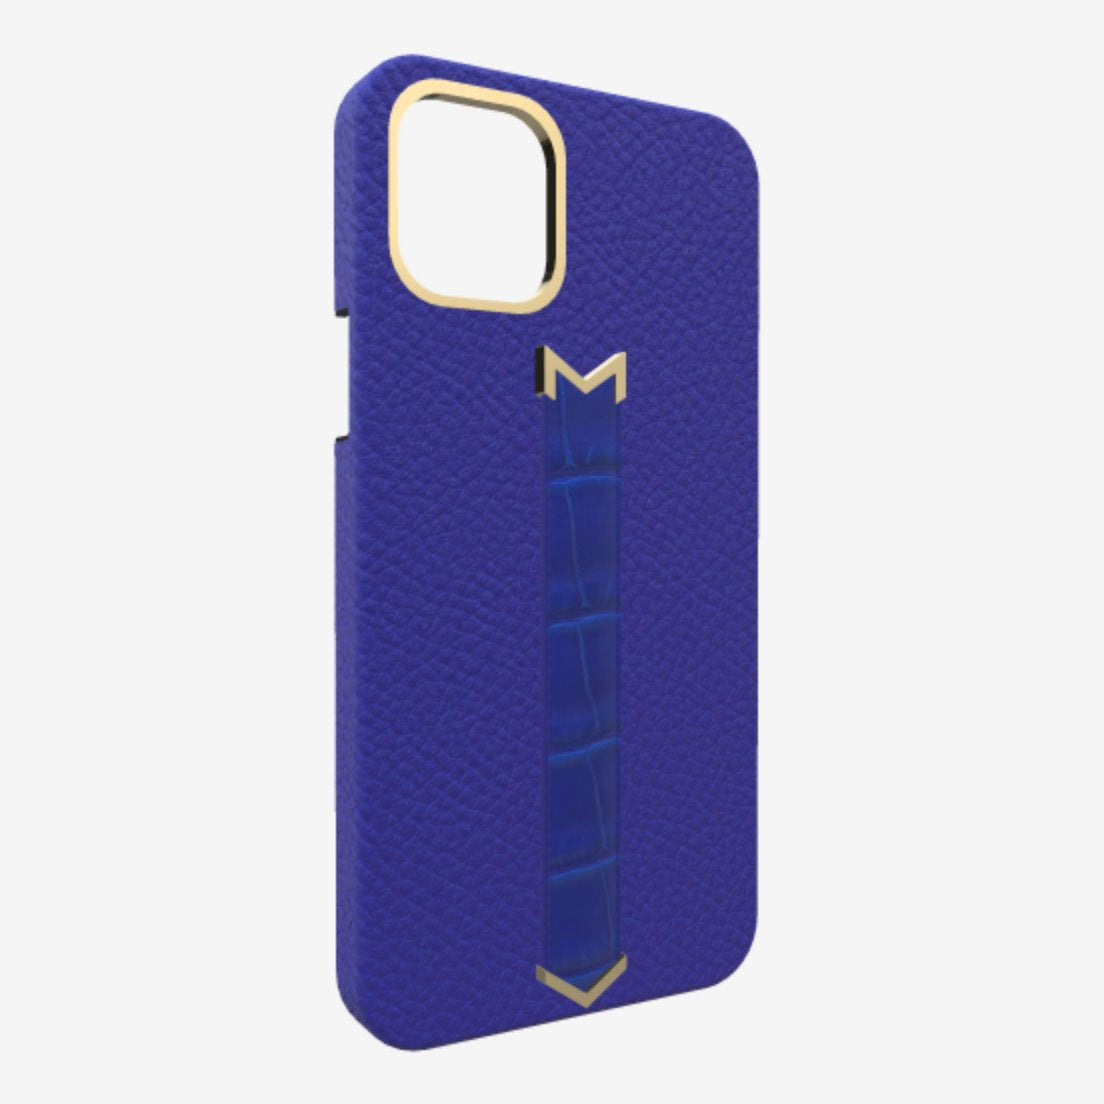 Gold Finger Strap Case for iPhone 13 Pro in Genuine Calfskin and Alligator Electric Blue Electric Blue 